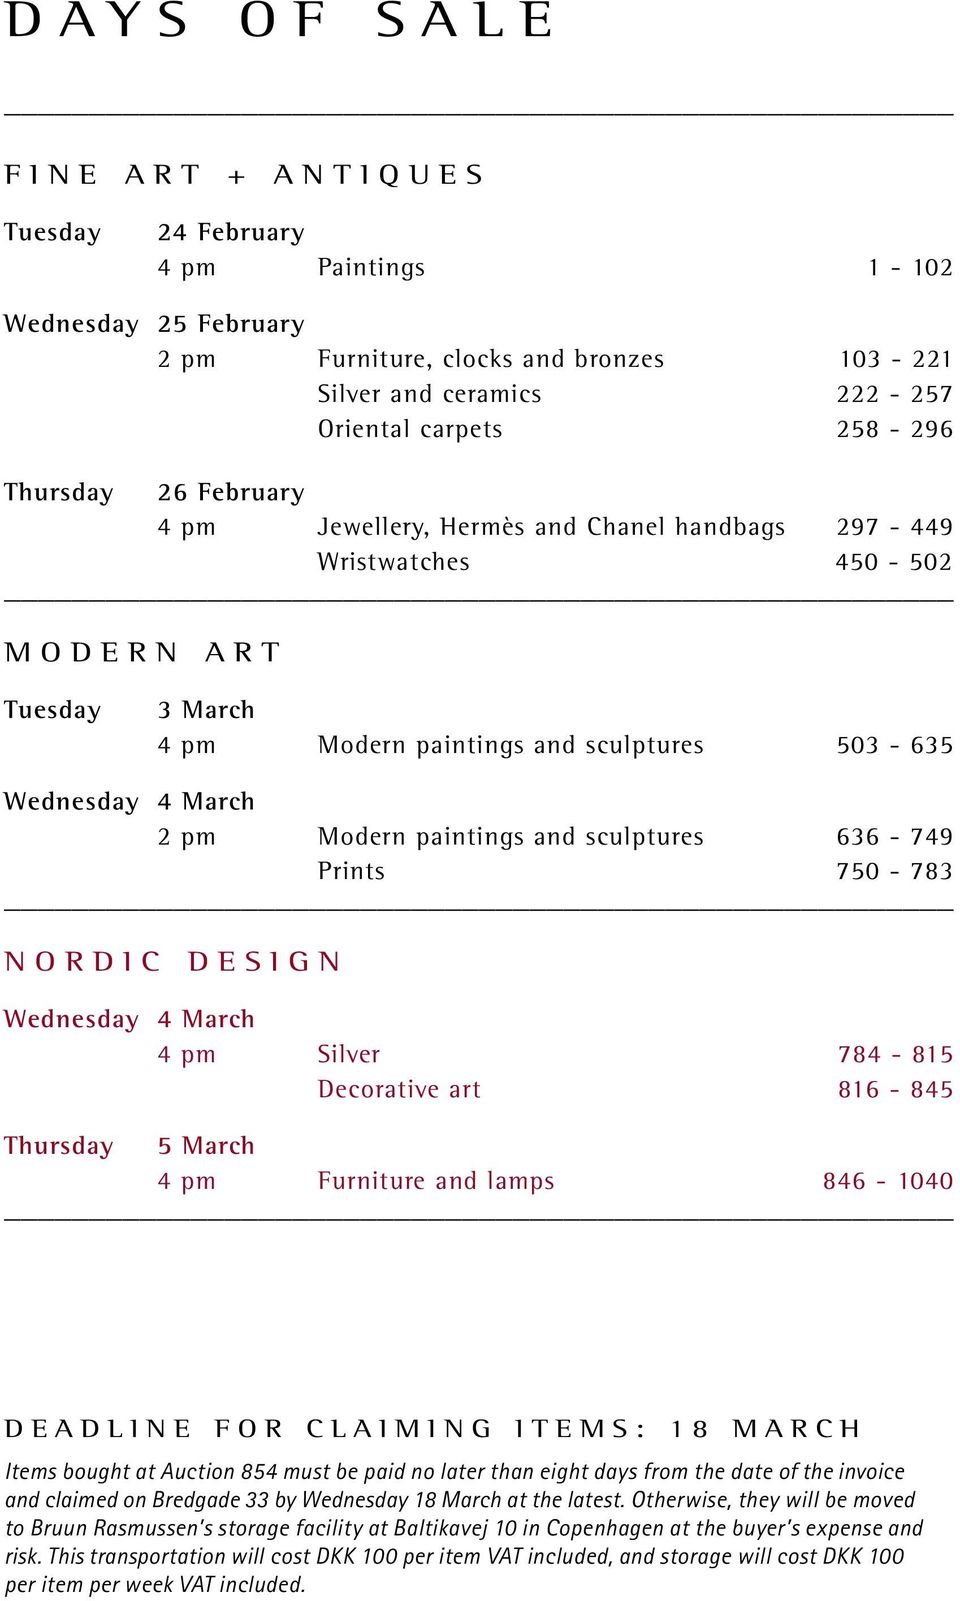 paintings and sculptures 636-749 Prints 750-783 NORDIC DESIGN Wednesday 4 March 4 pm Silver 784-815 Decorative art 816-845 Thursday 5 March 4 pm Furniture and lamps 846-1040 DEADLINE FOR CLAIMING